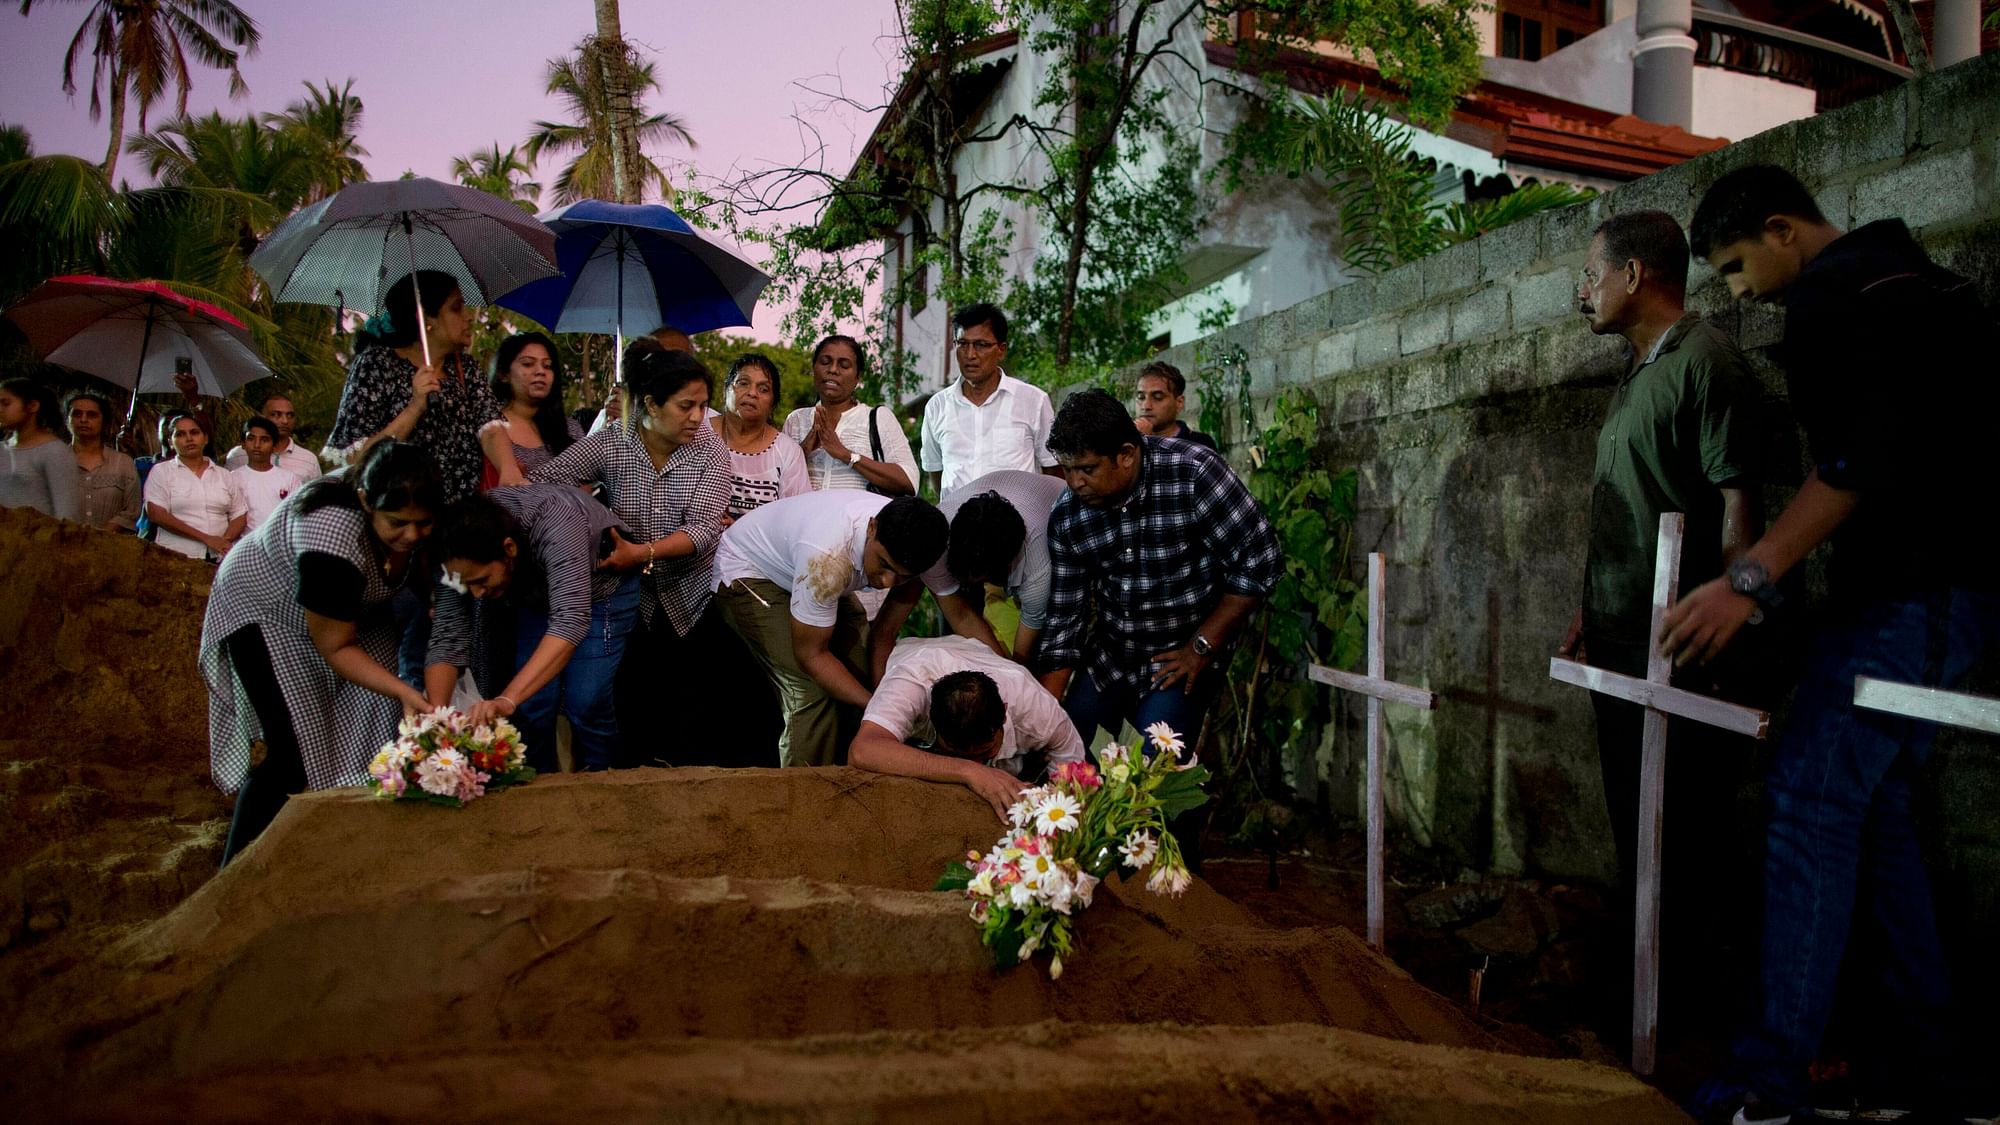 Relatives place flowers after the burial of three victims of the same family, who died during the Easter Sunday bomb blast at St Sebastian Church.